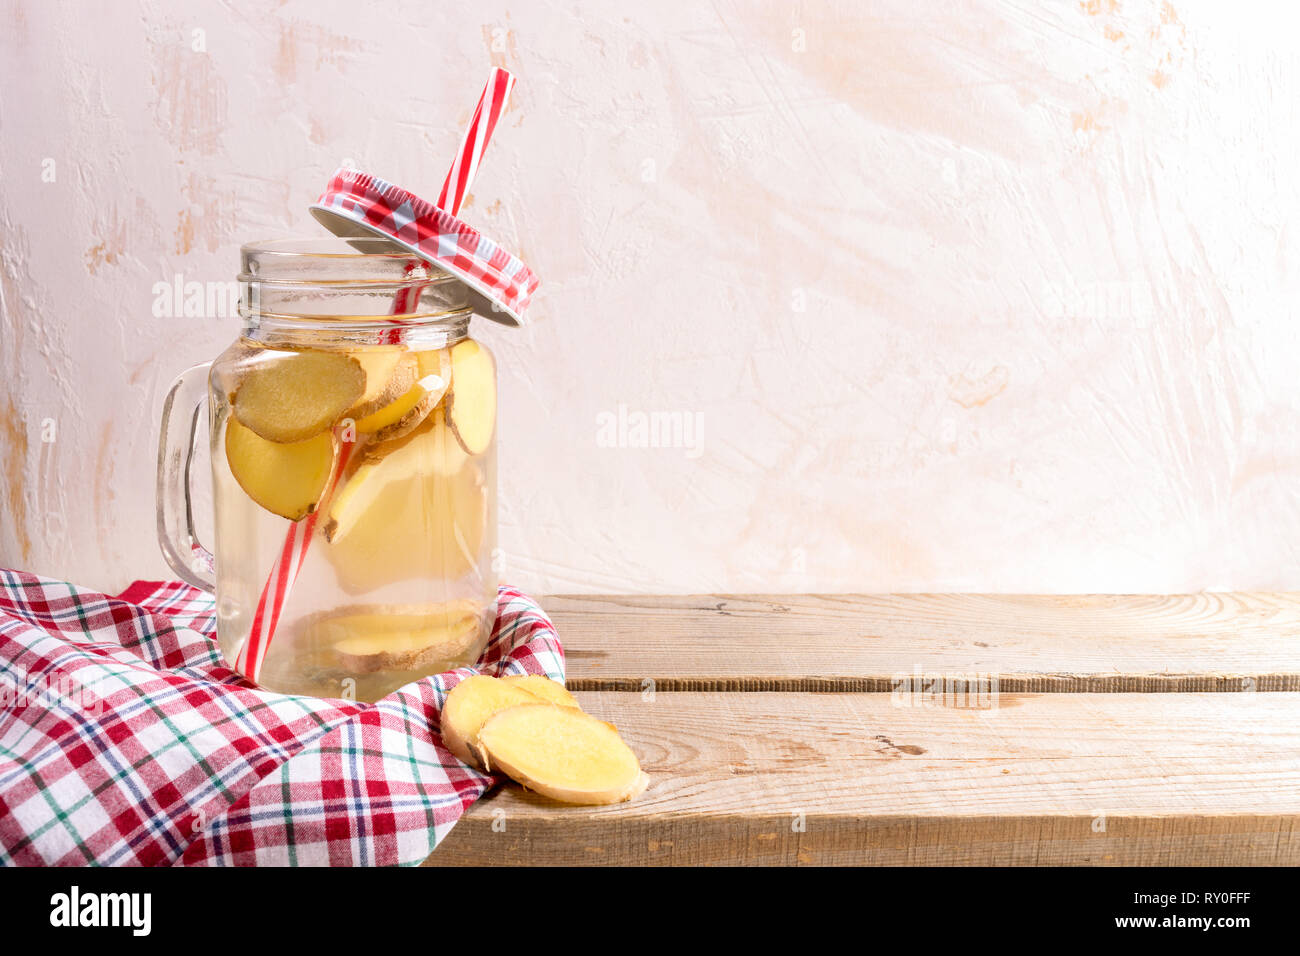 Glass jar with ginger water with drinking straw and tartan cap and cloth on wooden planks on light background. Stock Photo